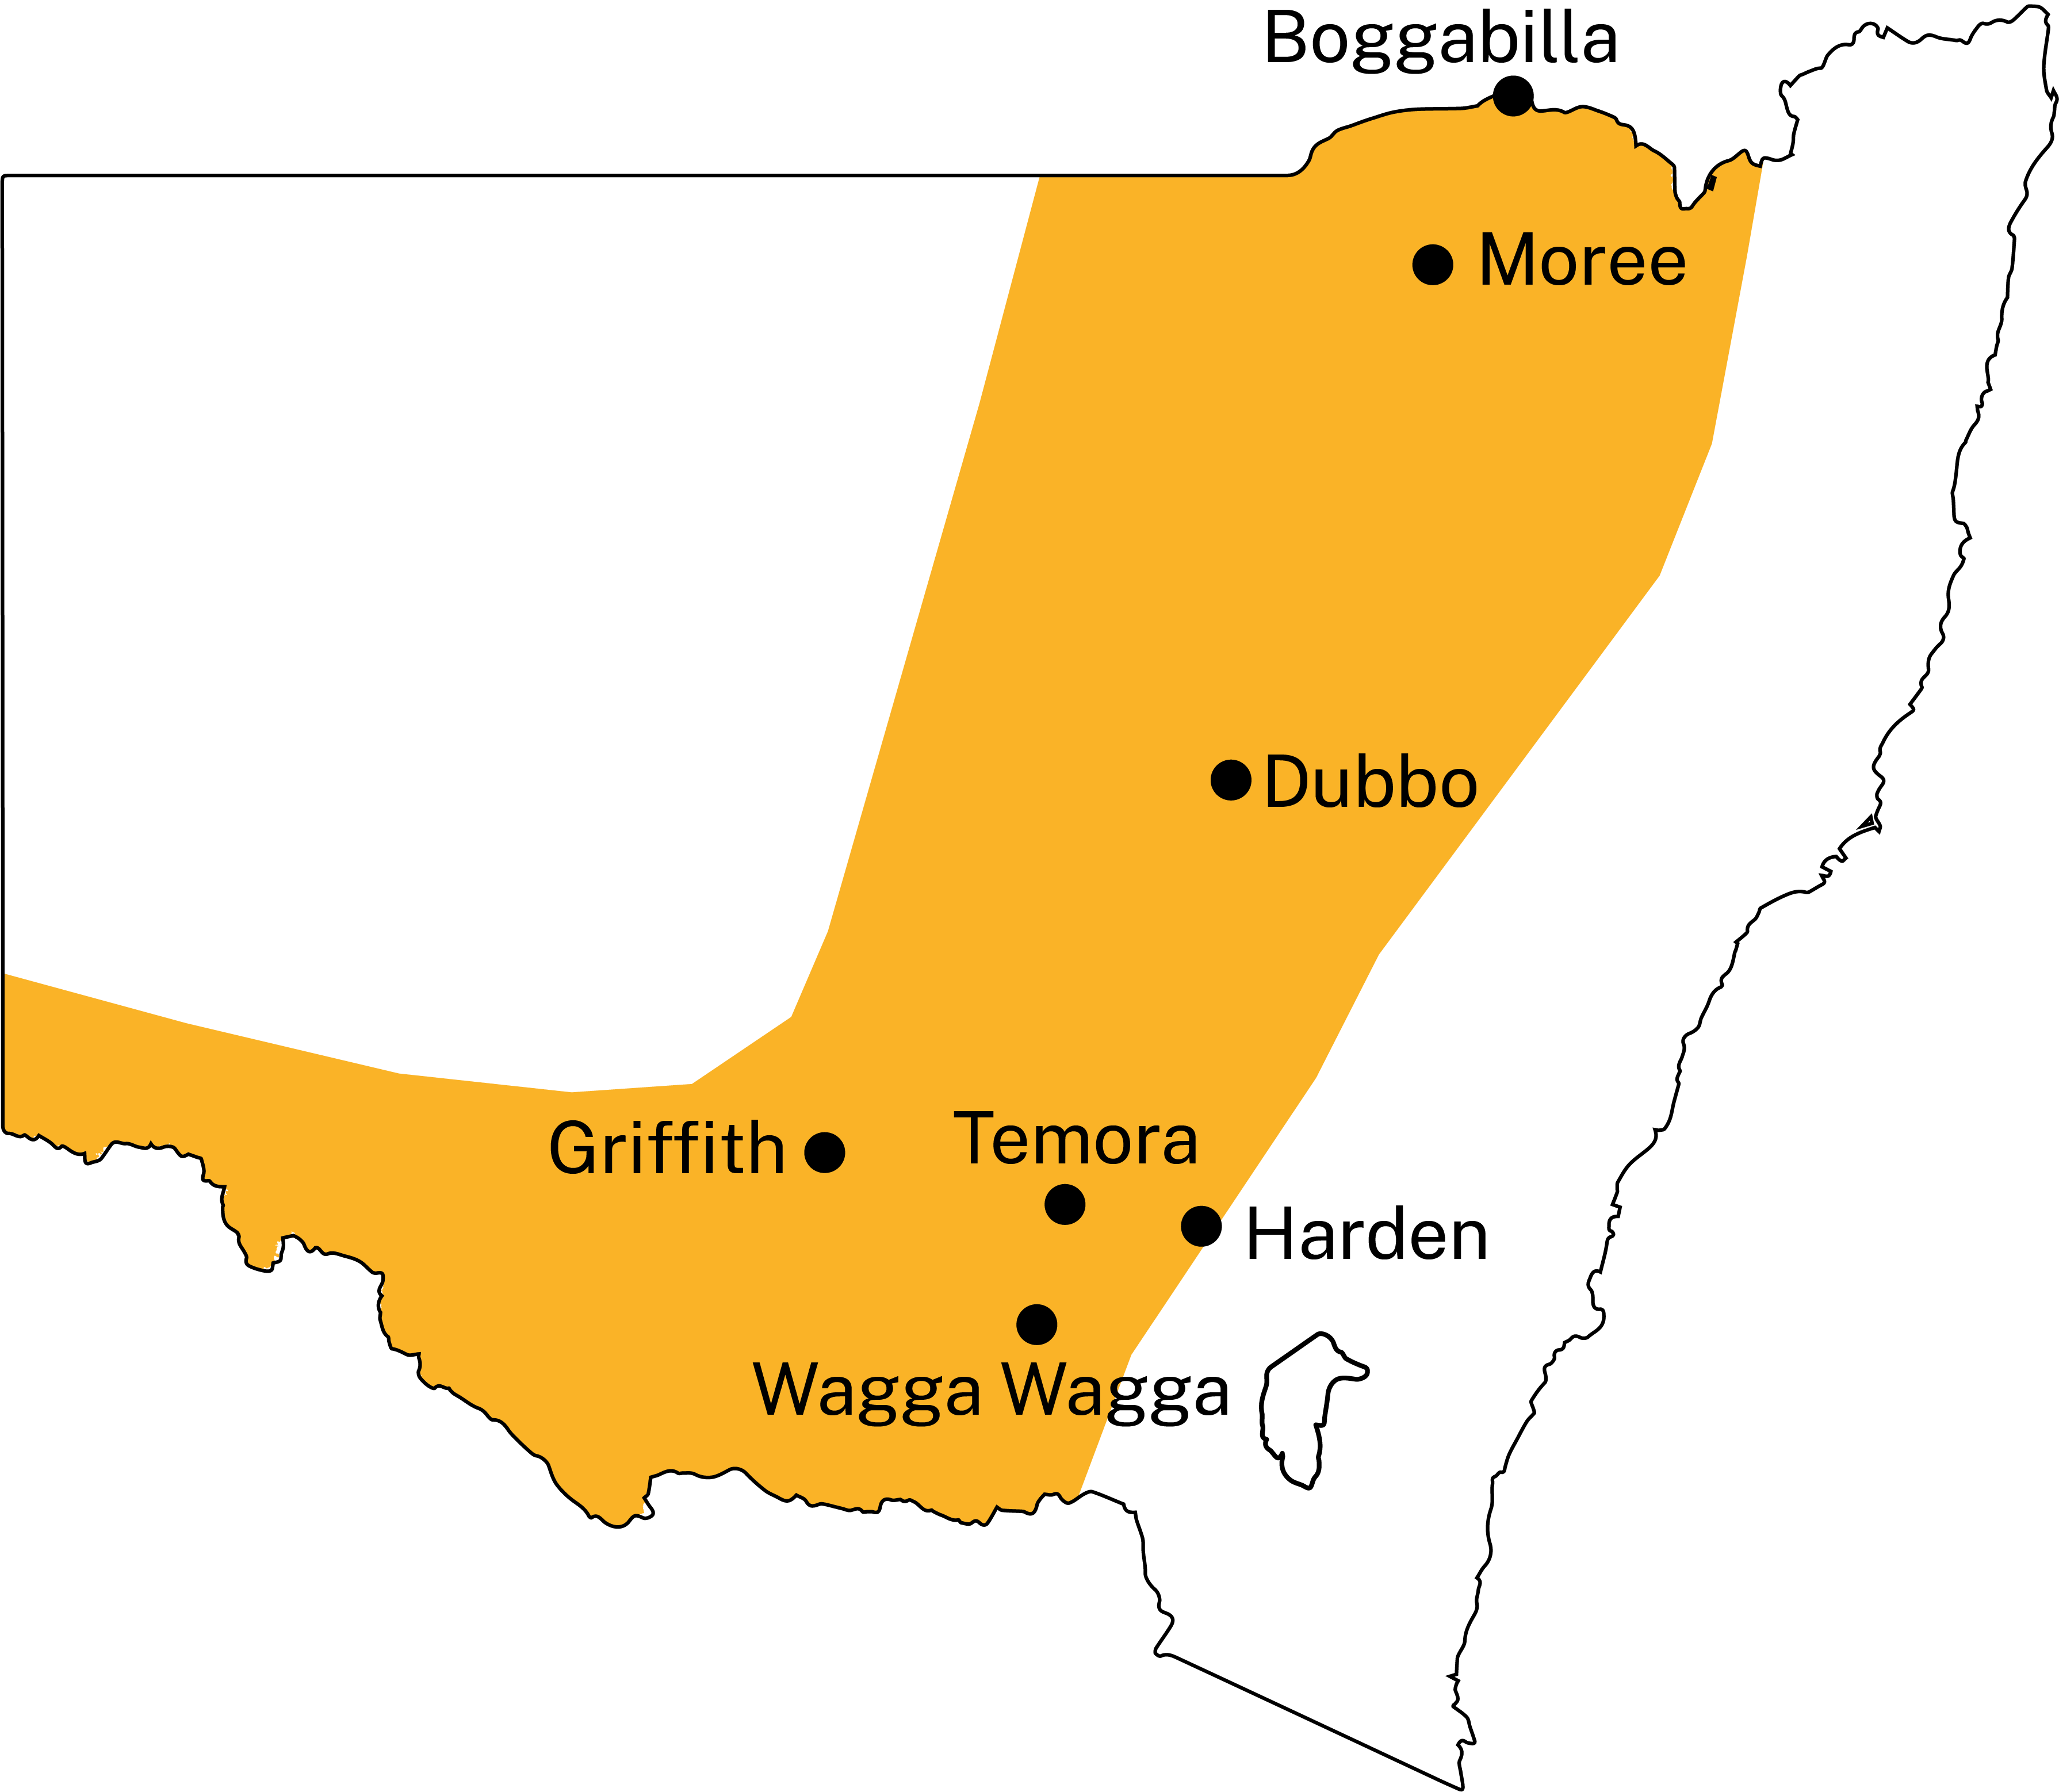 Stem rust threatens the NSW wheat belt, which runs along the southern border and north to Queensland, west of the Great Dividing Range.